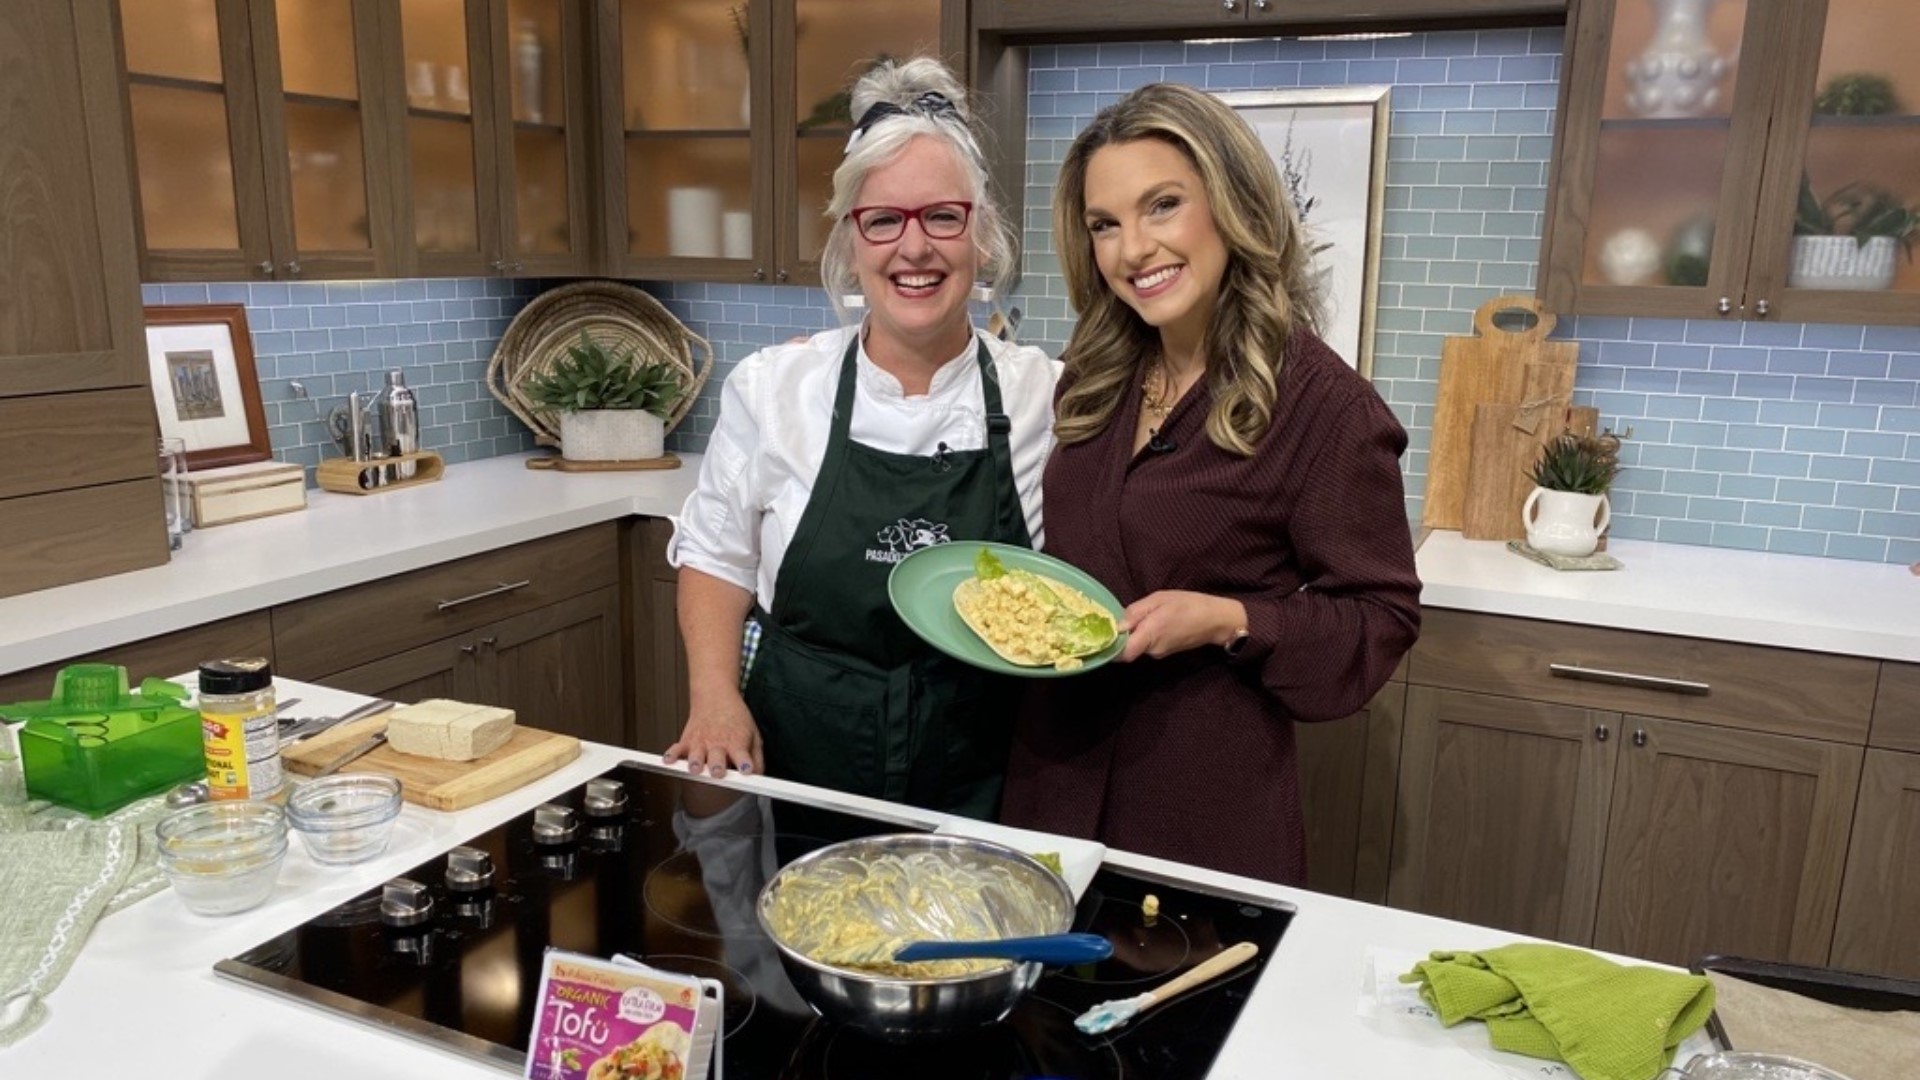 Amy Webster from Rainy Day Vegan joined New Day to share a recipe for a vegan egg salad made with tofu! #newdaynw